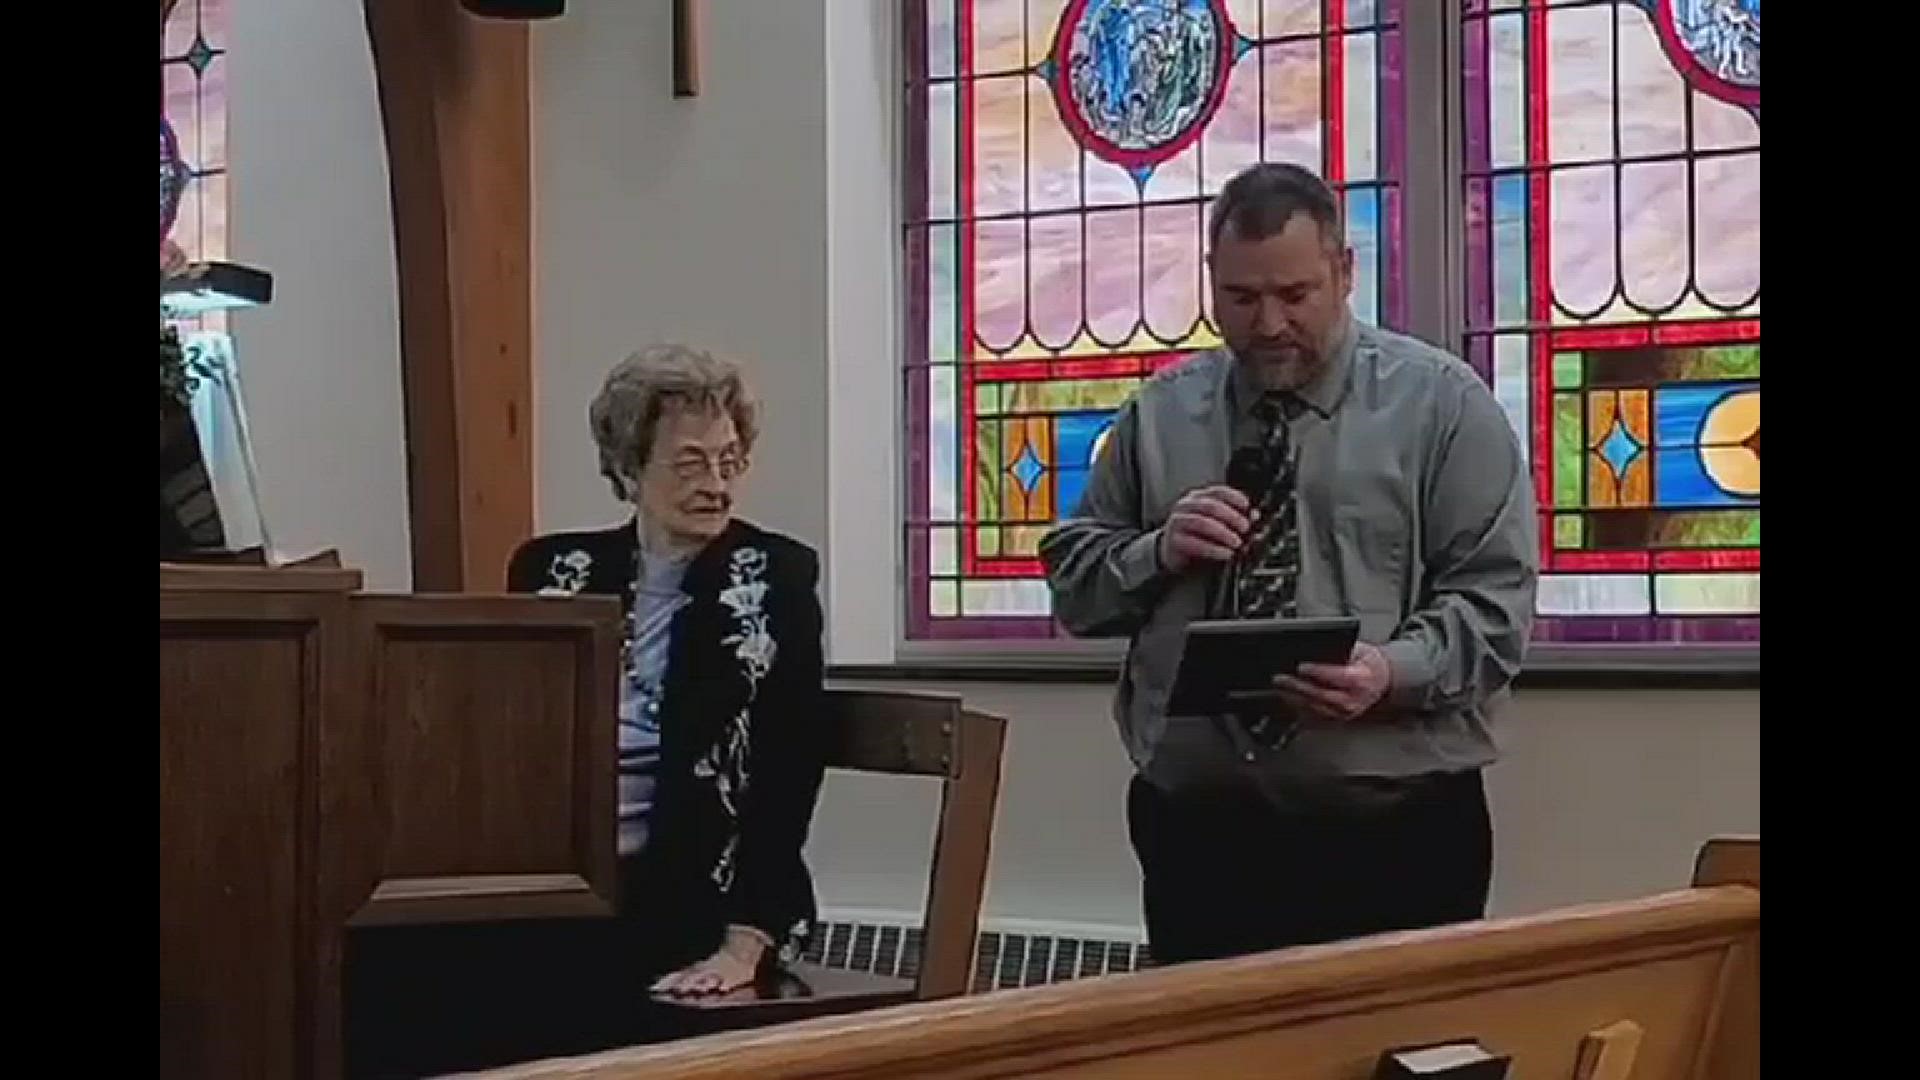 Midway Wesleyan Church in Randleman, North Carolina honored 89-year-old Violet Kirkman for playing the organ for the last 75 years.